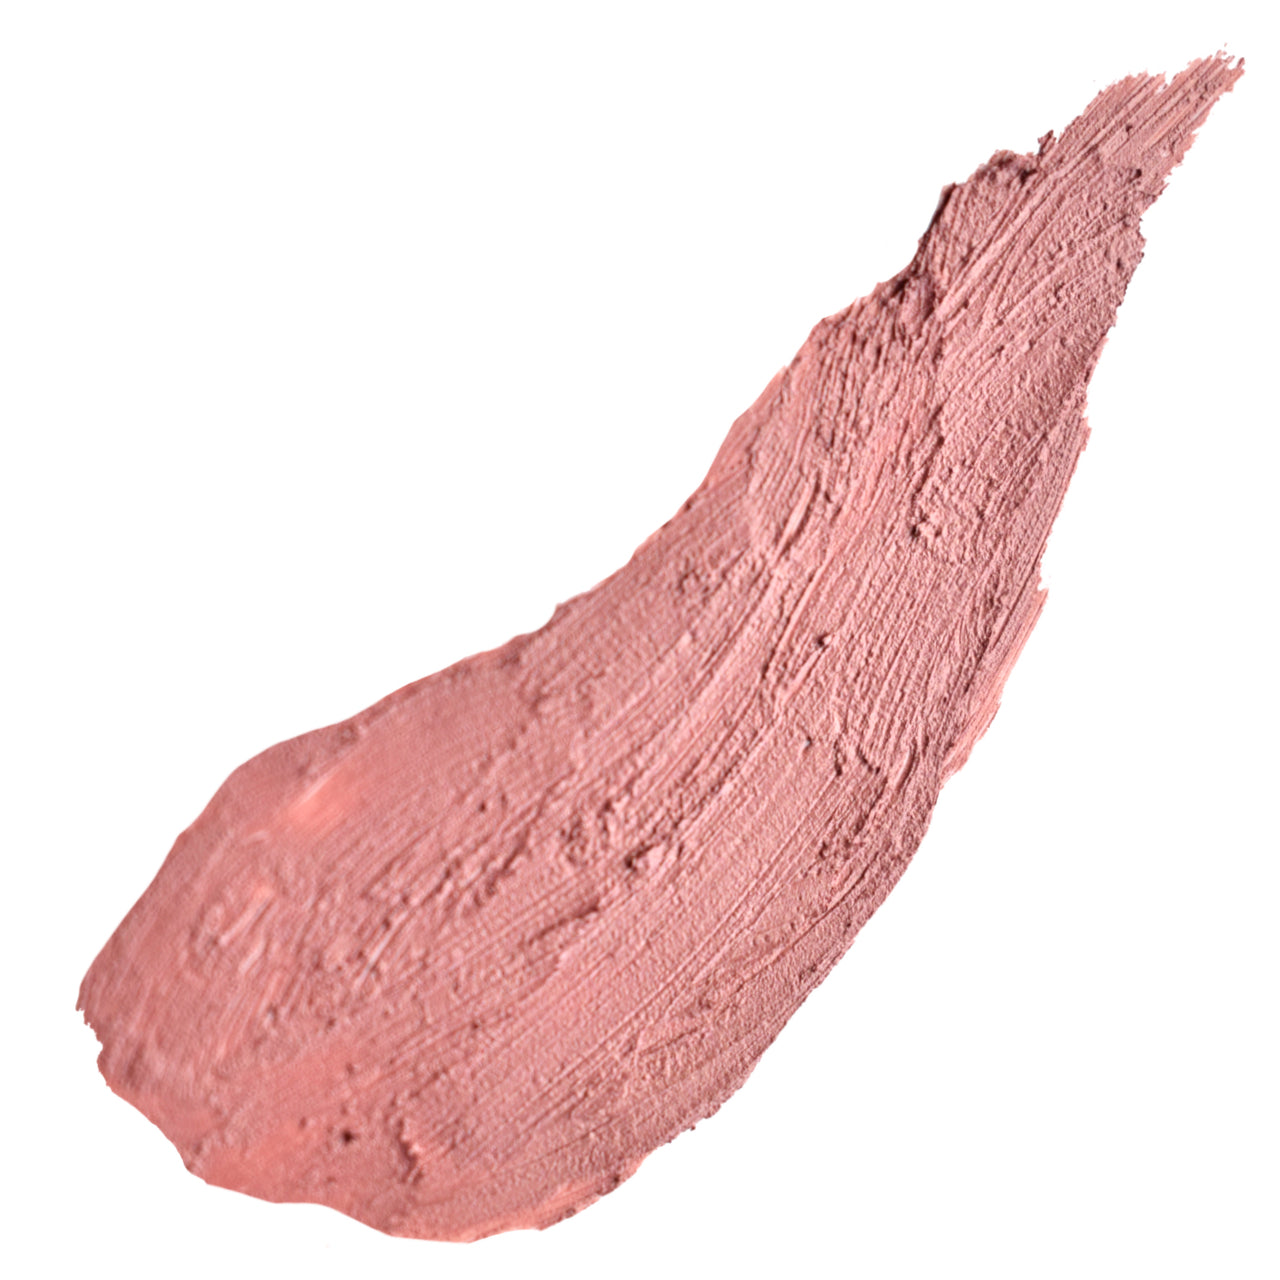 Lotus - Soft Neutral Nude Brown Pink Long Lasting Organic Lipstick swatch on white background